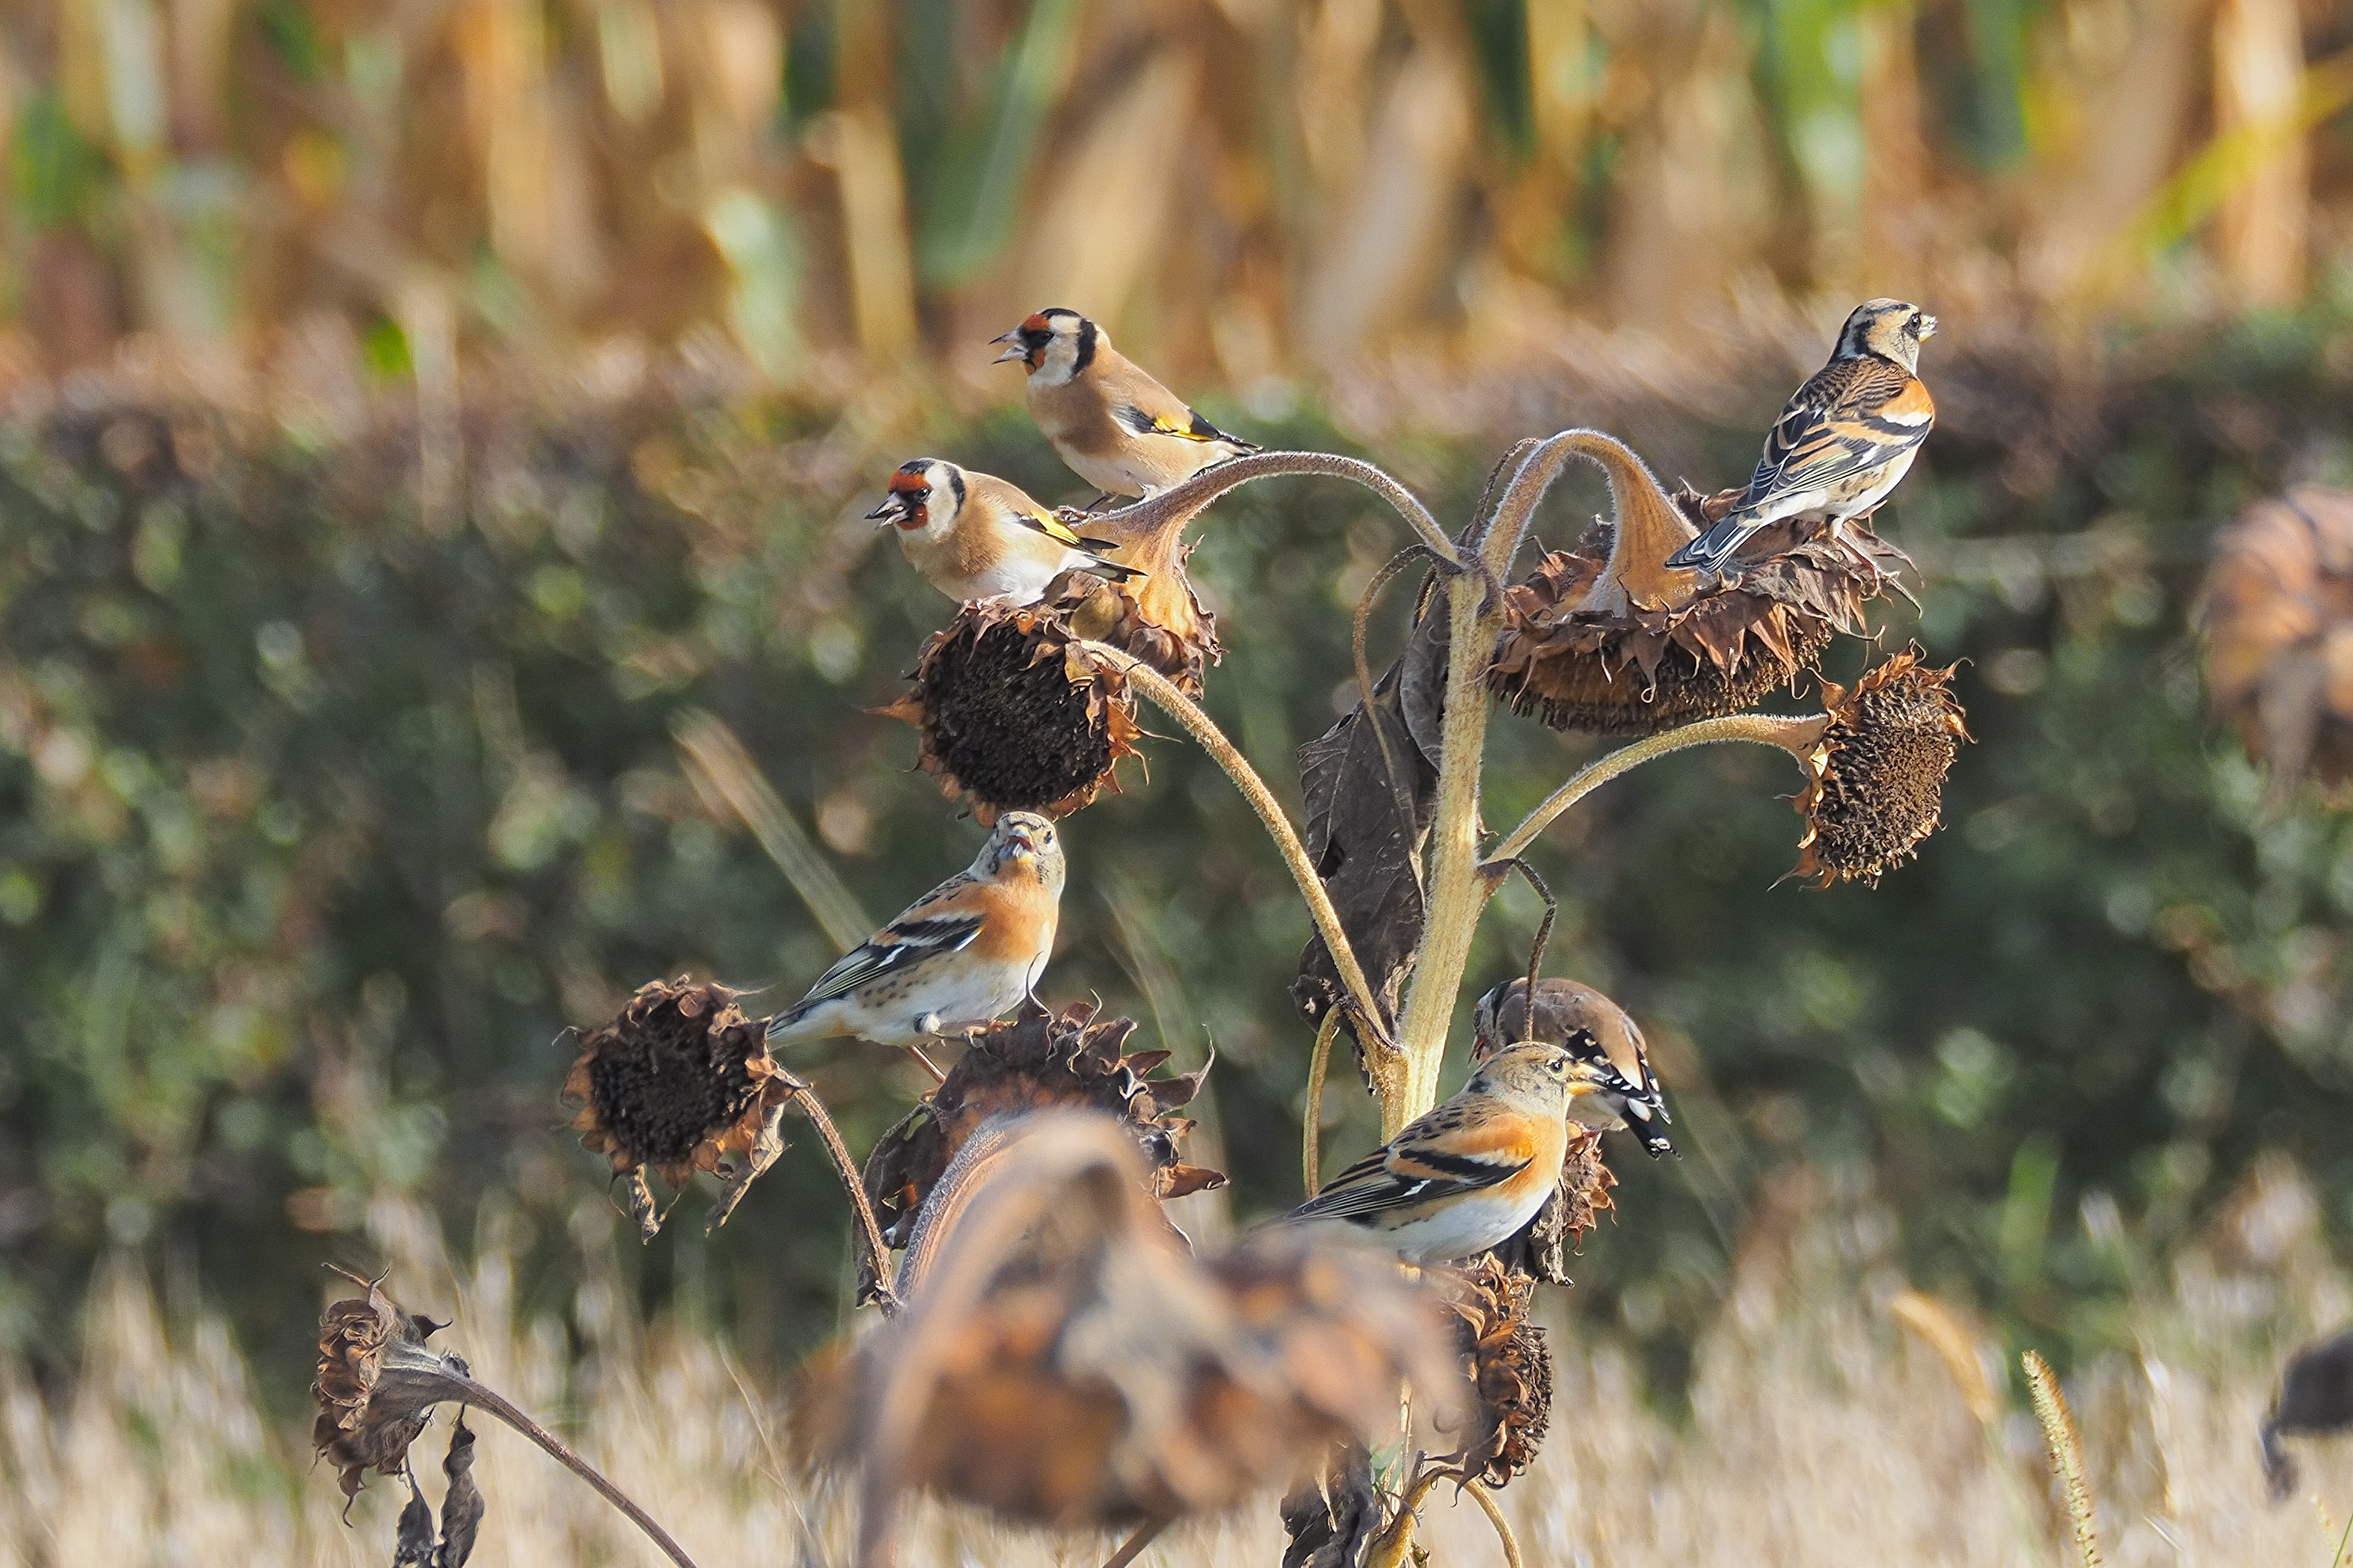 brunch of goldfinch and brambling with sunflower seeds